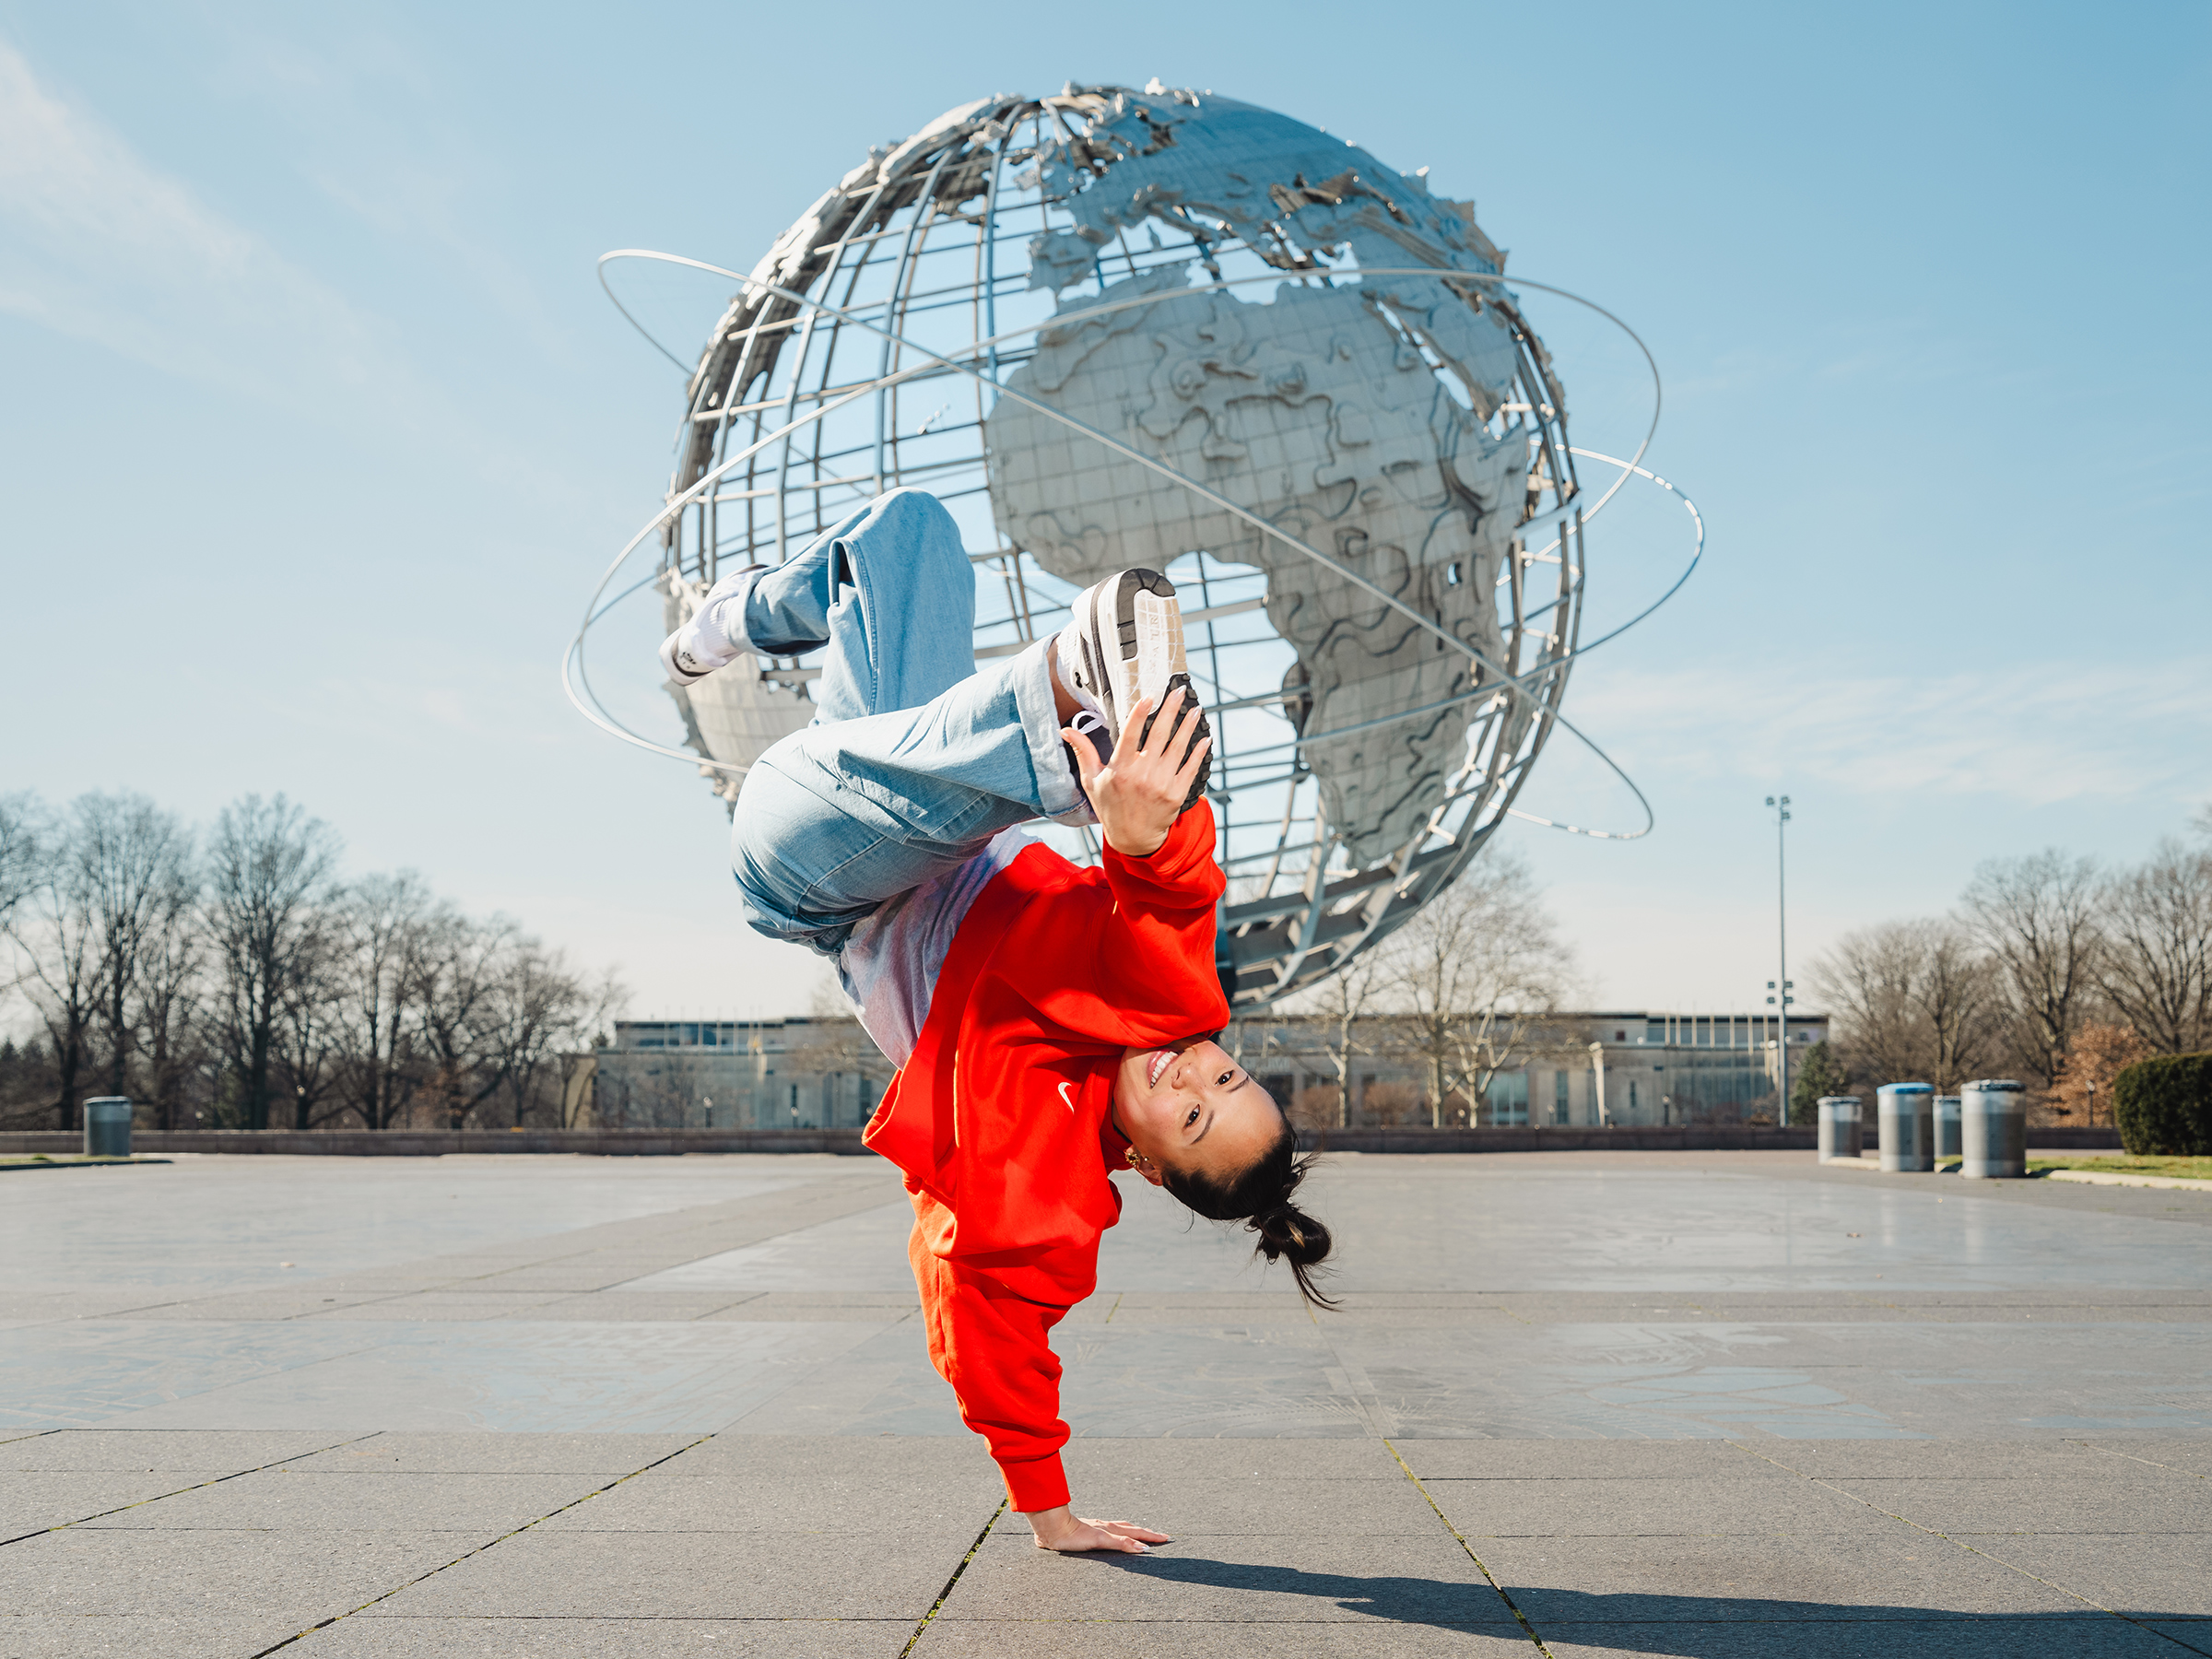 Choi shows off a move near the Unisphere at Flushing Meadows Corona Park in New York City. “Breakers used to break back in the day under the globe,” she says